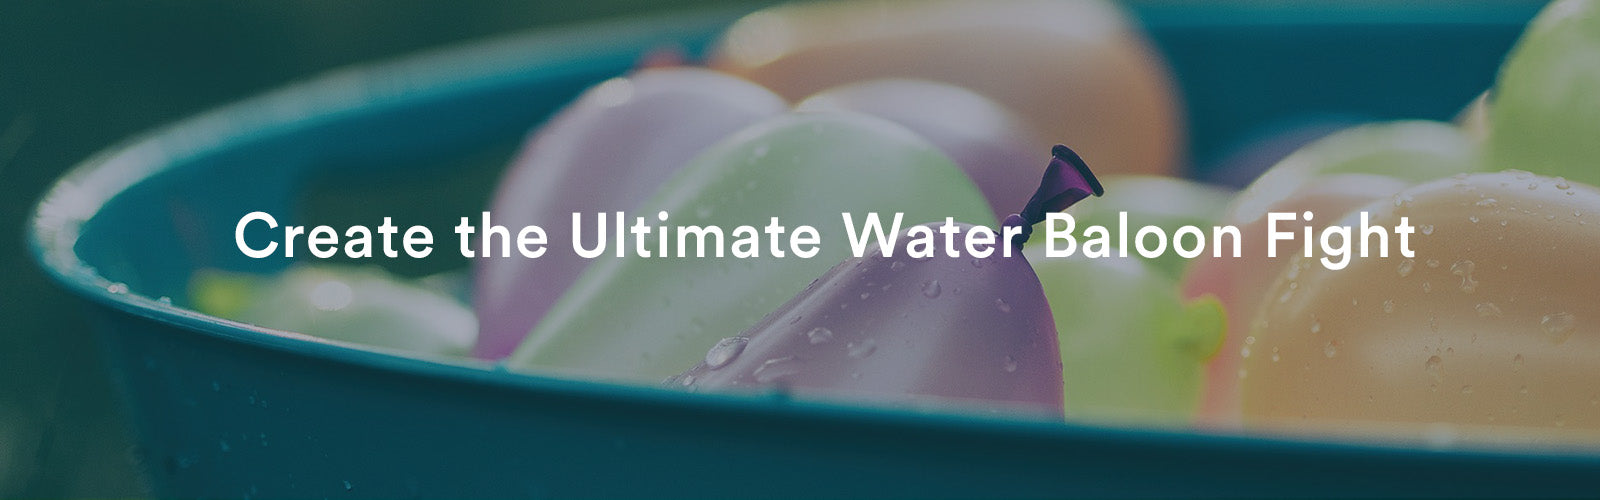 Create the Ultimate Water Balloon Fight